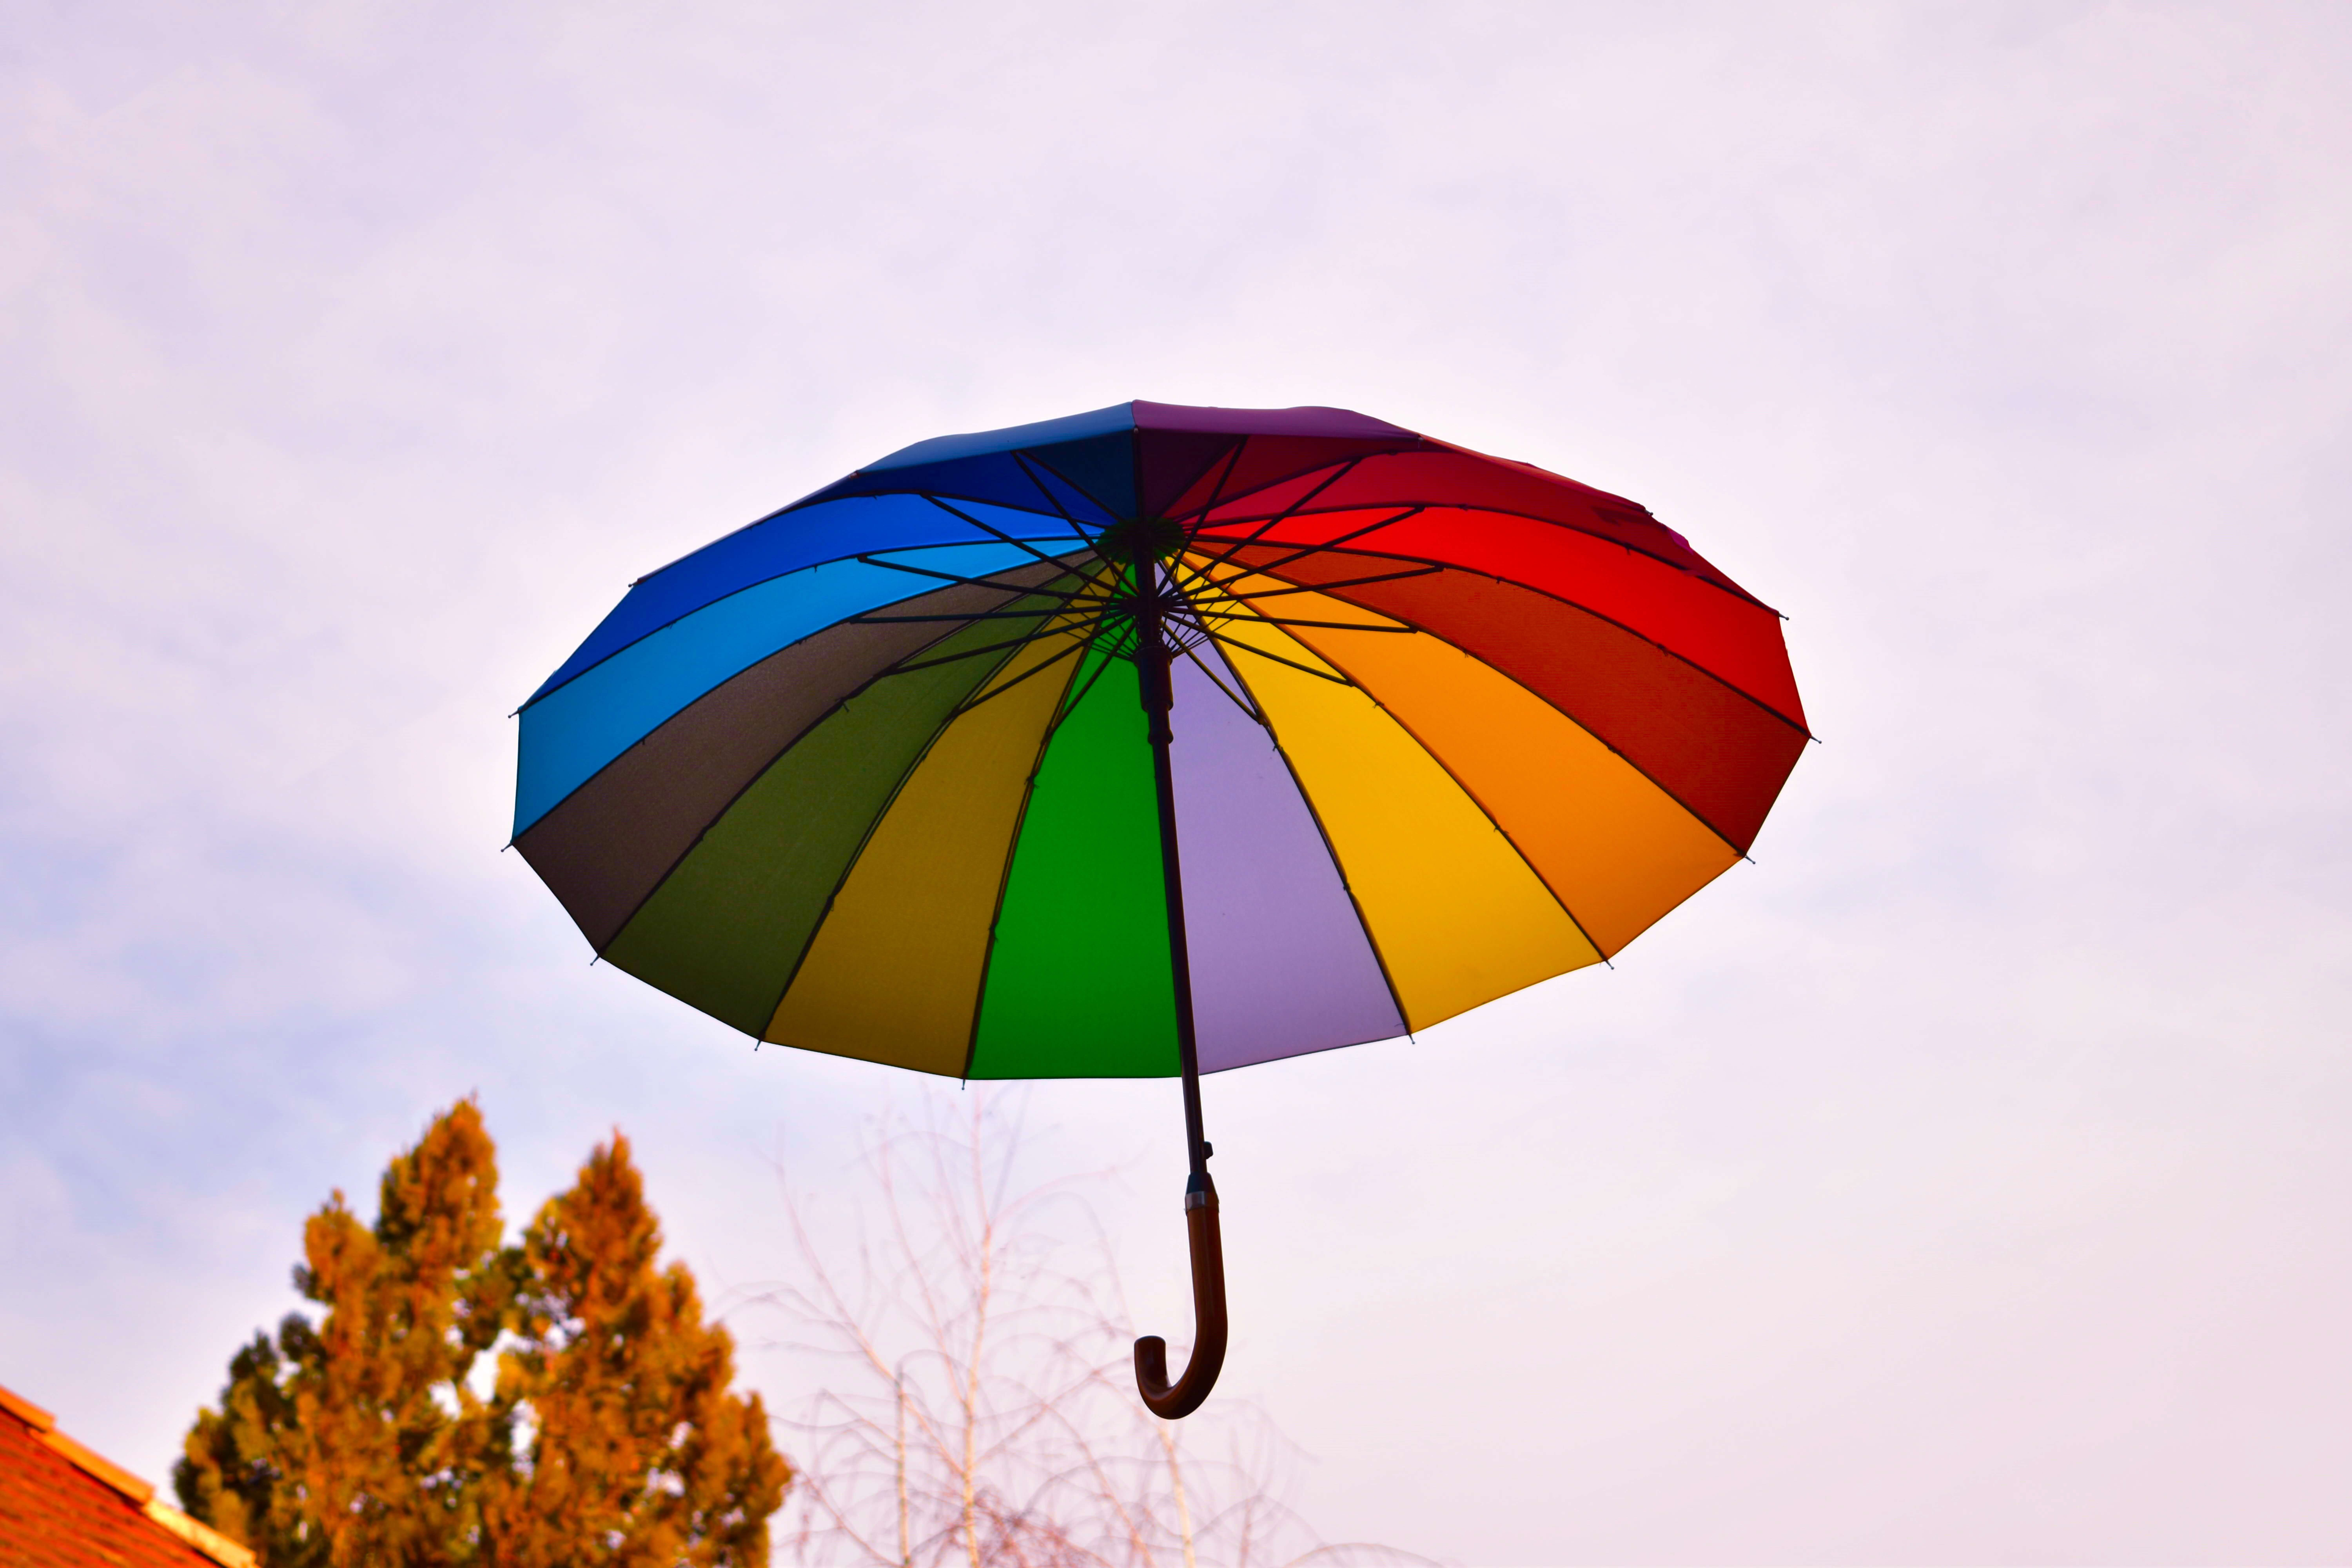 Colorful umbrella floating on a sunset sky. Each slice of the umbrella has a different color.